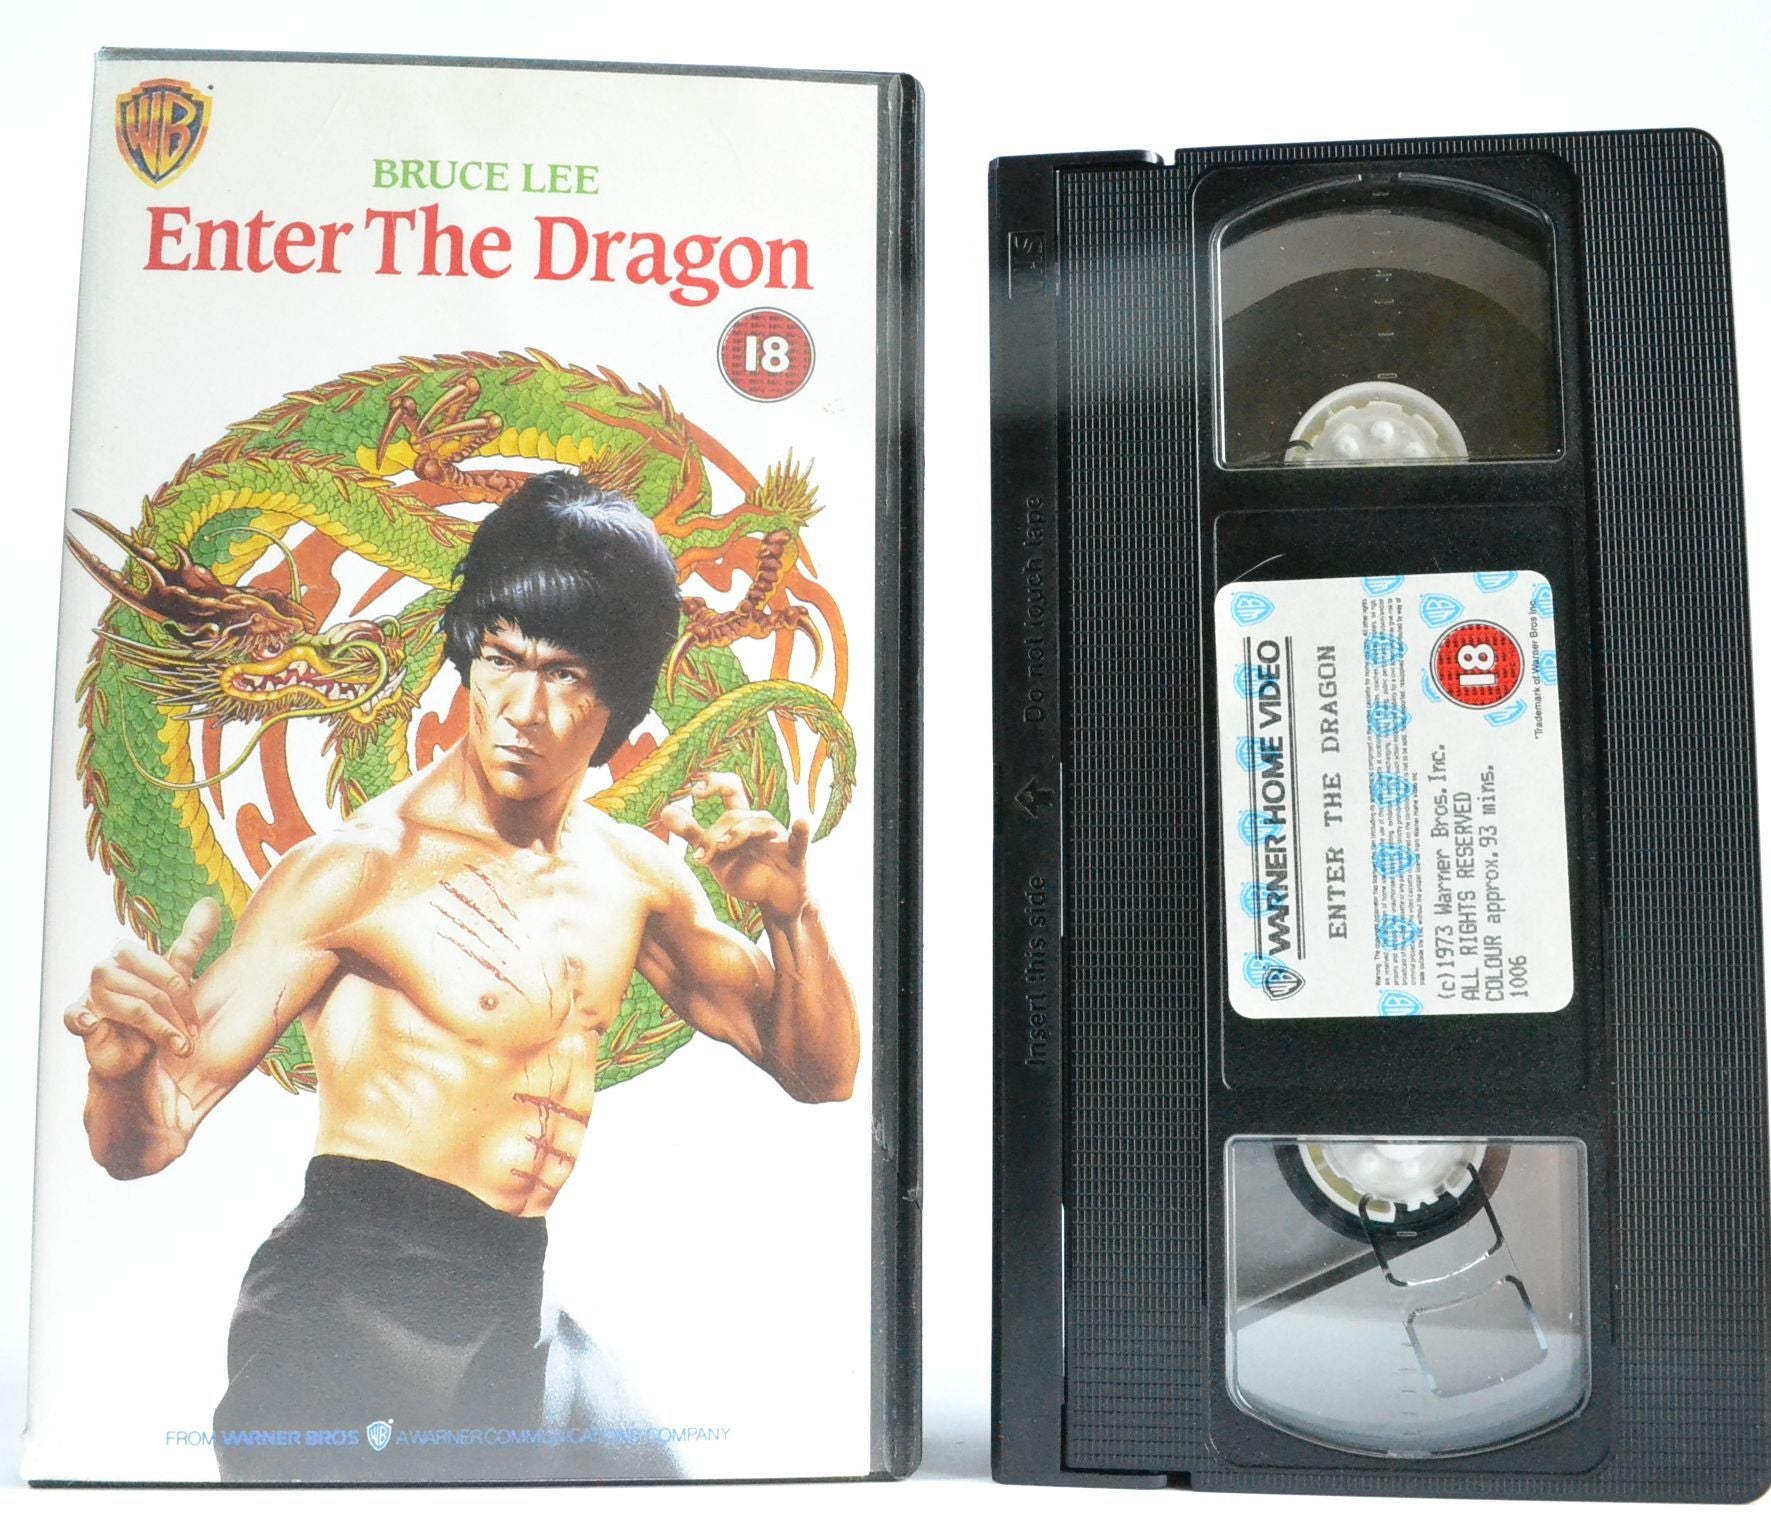 Enter The Dragon: Bruce Lee - Wing-Chun - Hollywood - Kung-Fu - Action - Kelly - VHS-